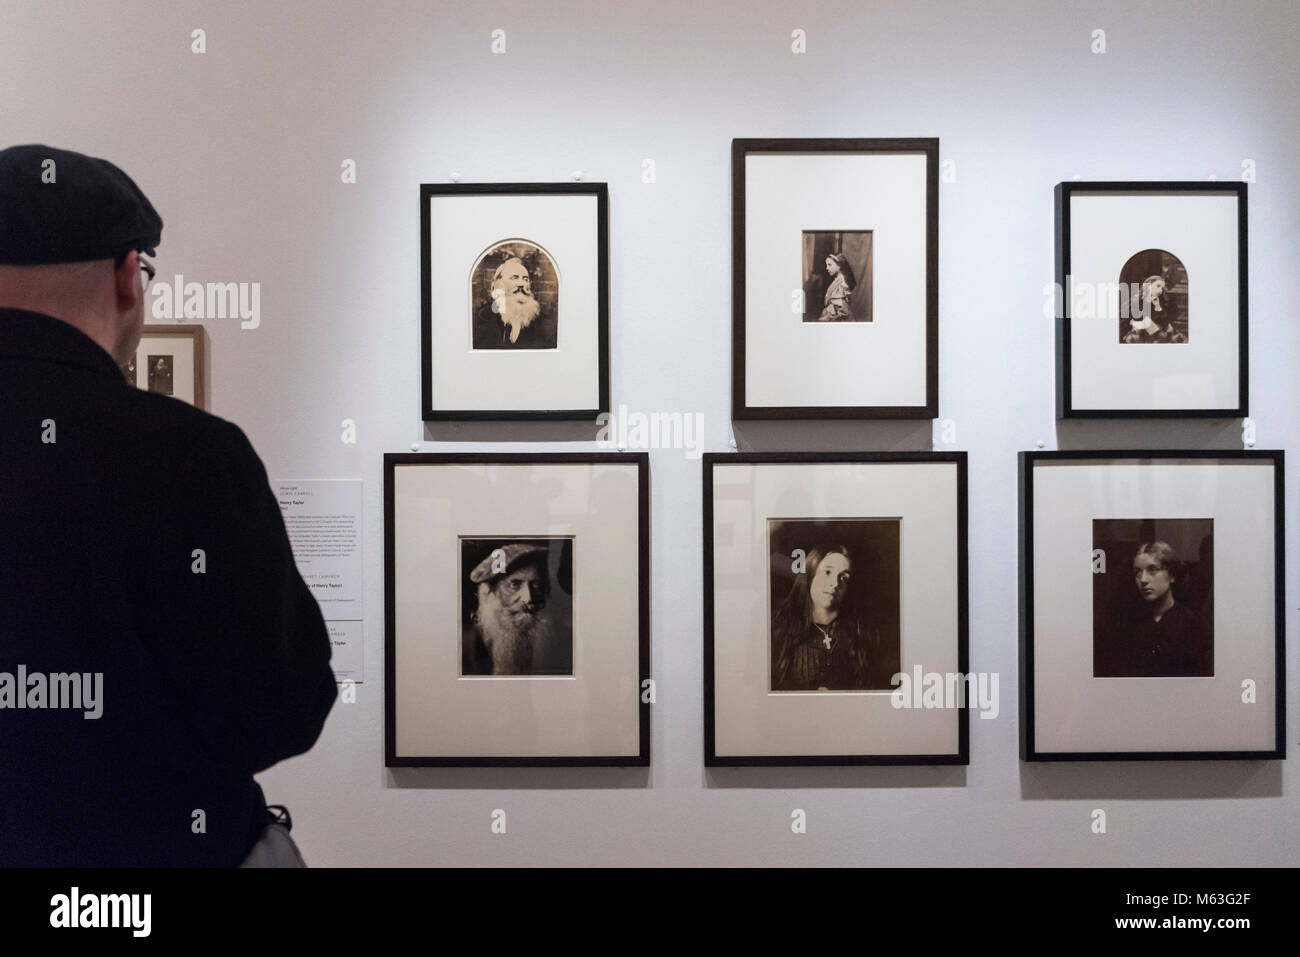 London, UK.  28 February 2018. A visitor views images at the preview of 'Victorian Giants:  The Birth of Art Photography' at the National Portrait Gallery featuring works by Lewis Carroll, Julia Margaret Cameron, Oscar Rejlander and Clementina Hawarden. Credit: Stephen Chung/Alamy Live News Stock Photo